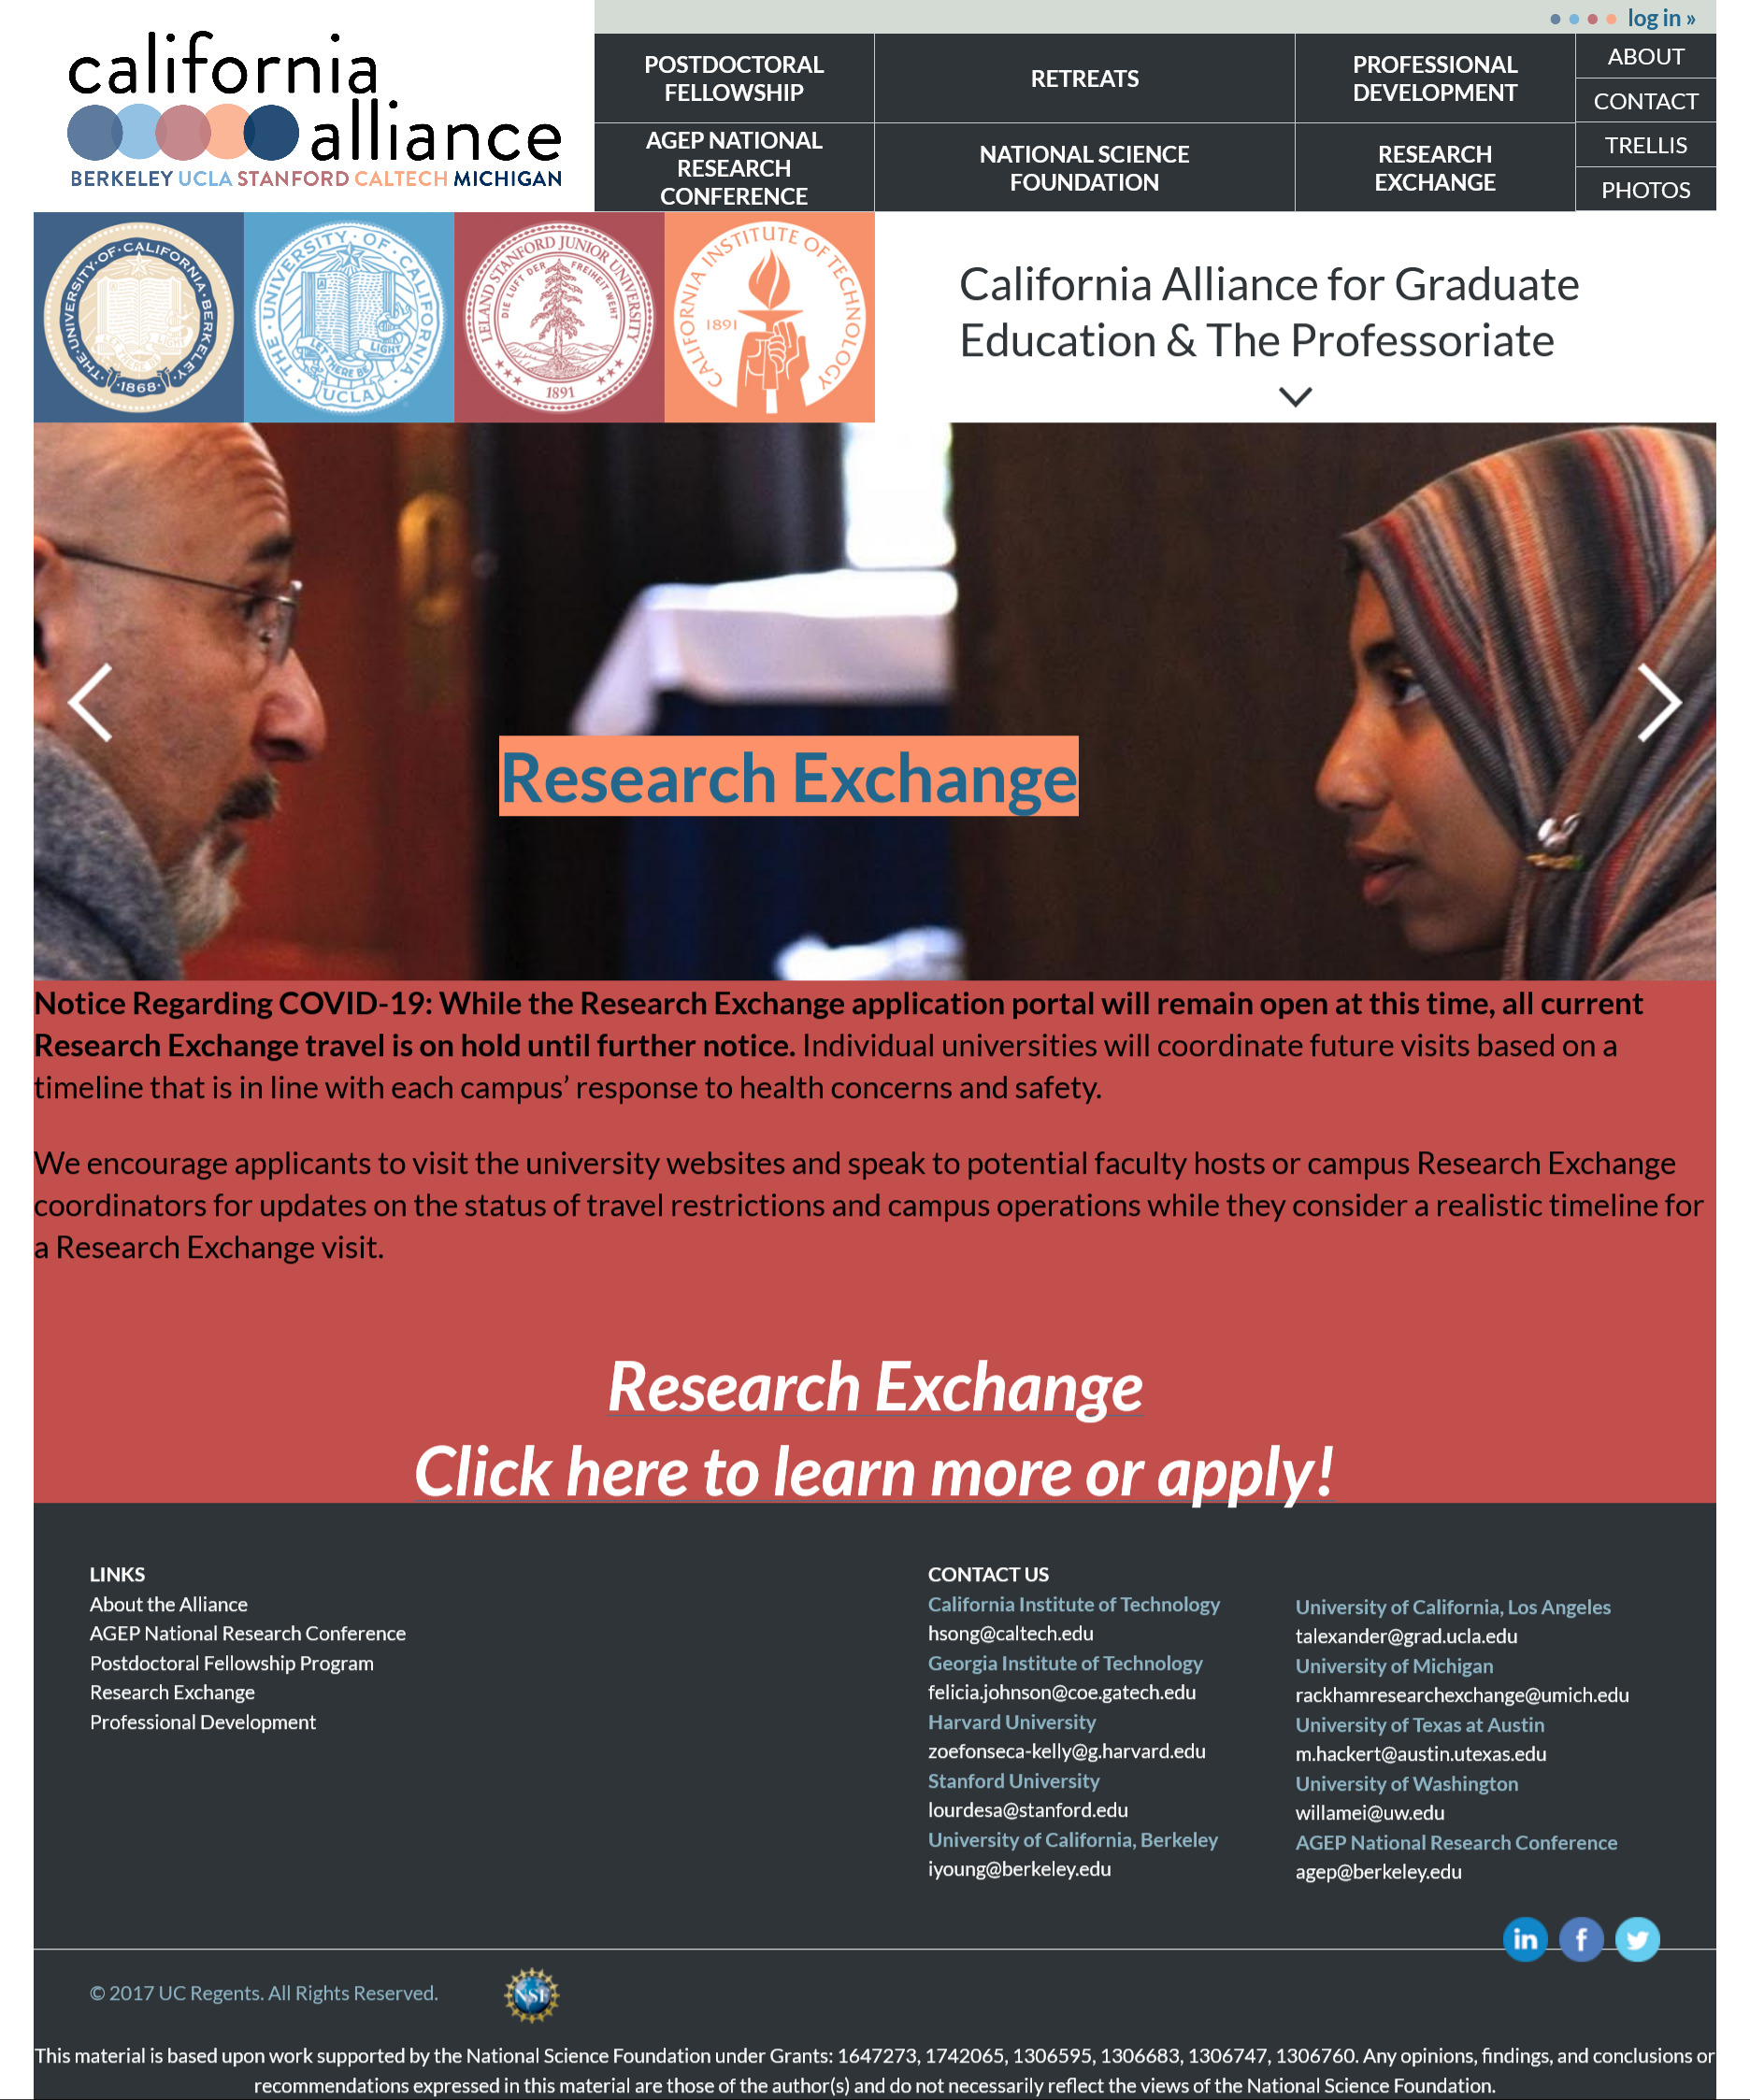 Image is a screen capture of California Alliance.org Homepage for archival purposes. Image includes copy from the homepage and time based announcements that are now outdated.